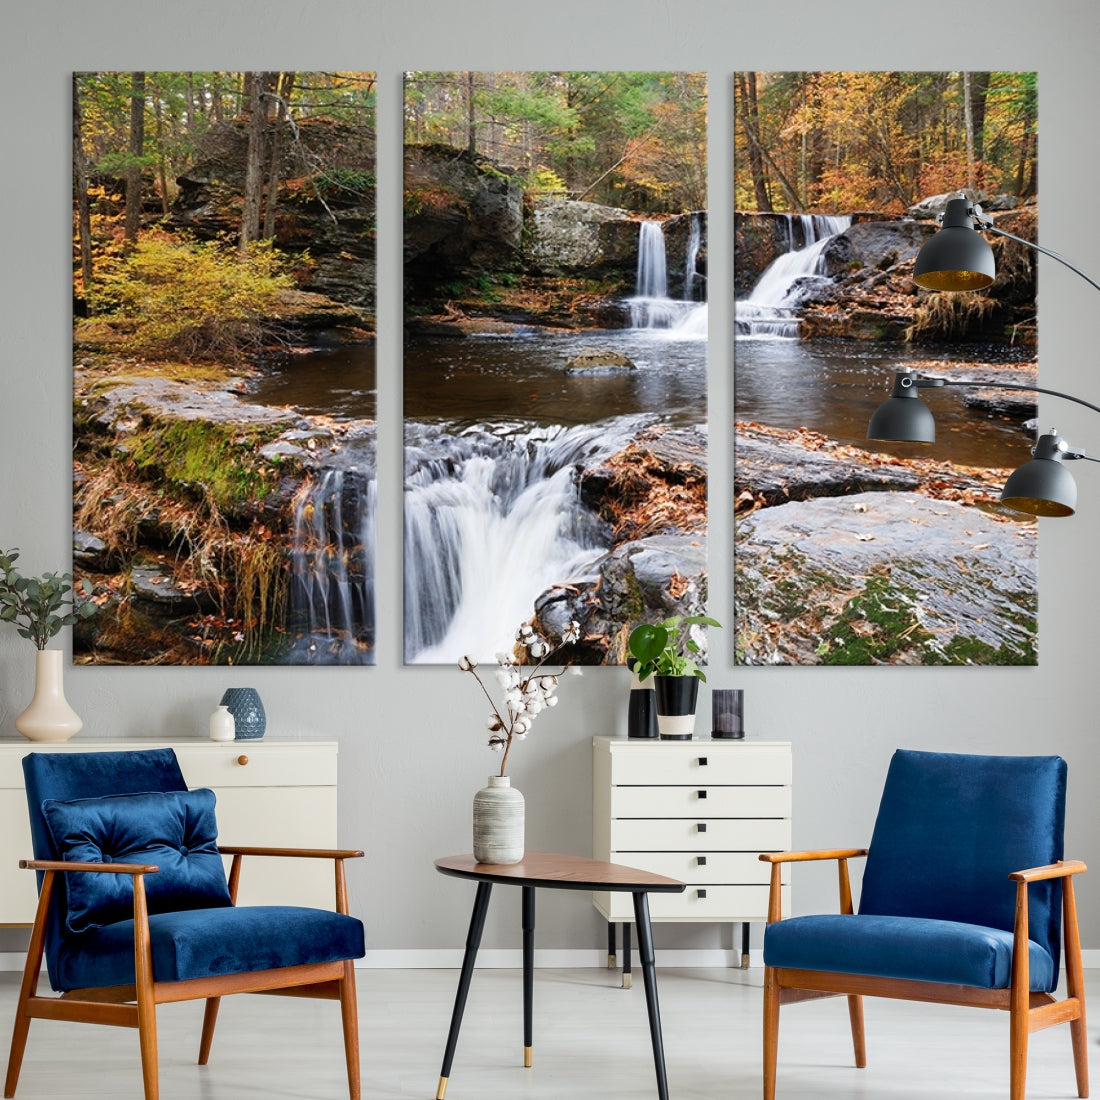 Large Wall Art Waterfall Canvas Print - Double Waterfalls in Forest